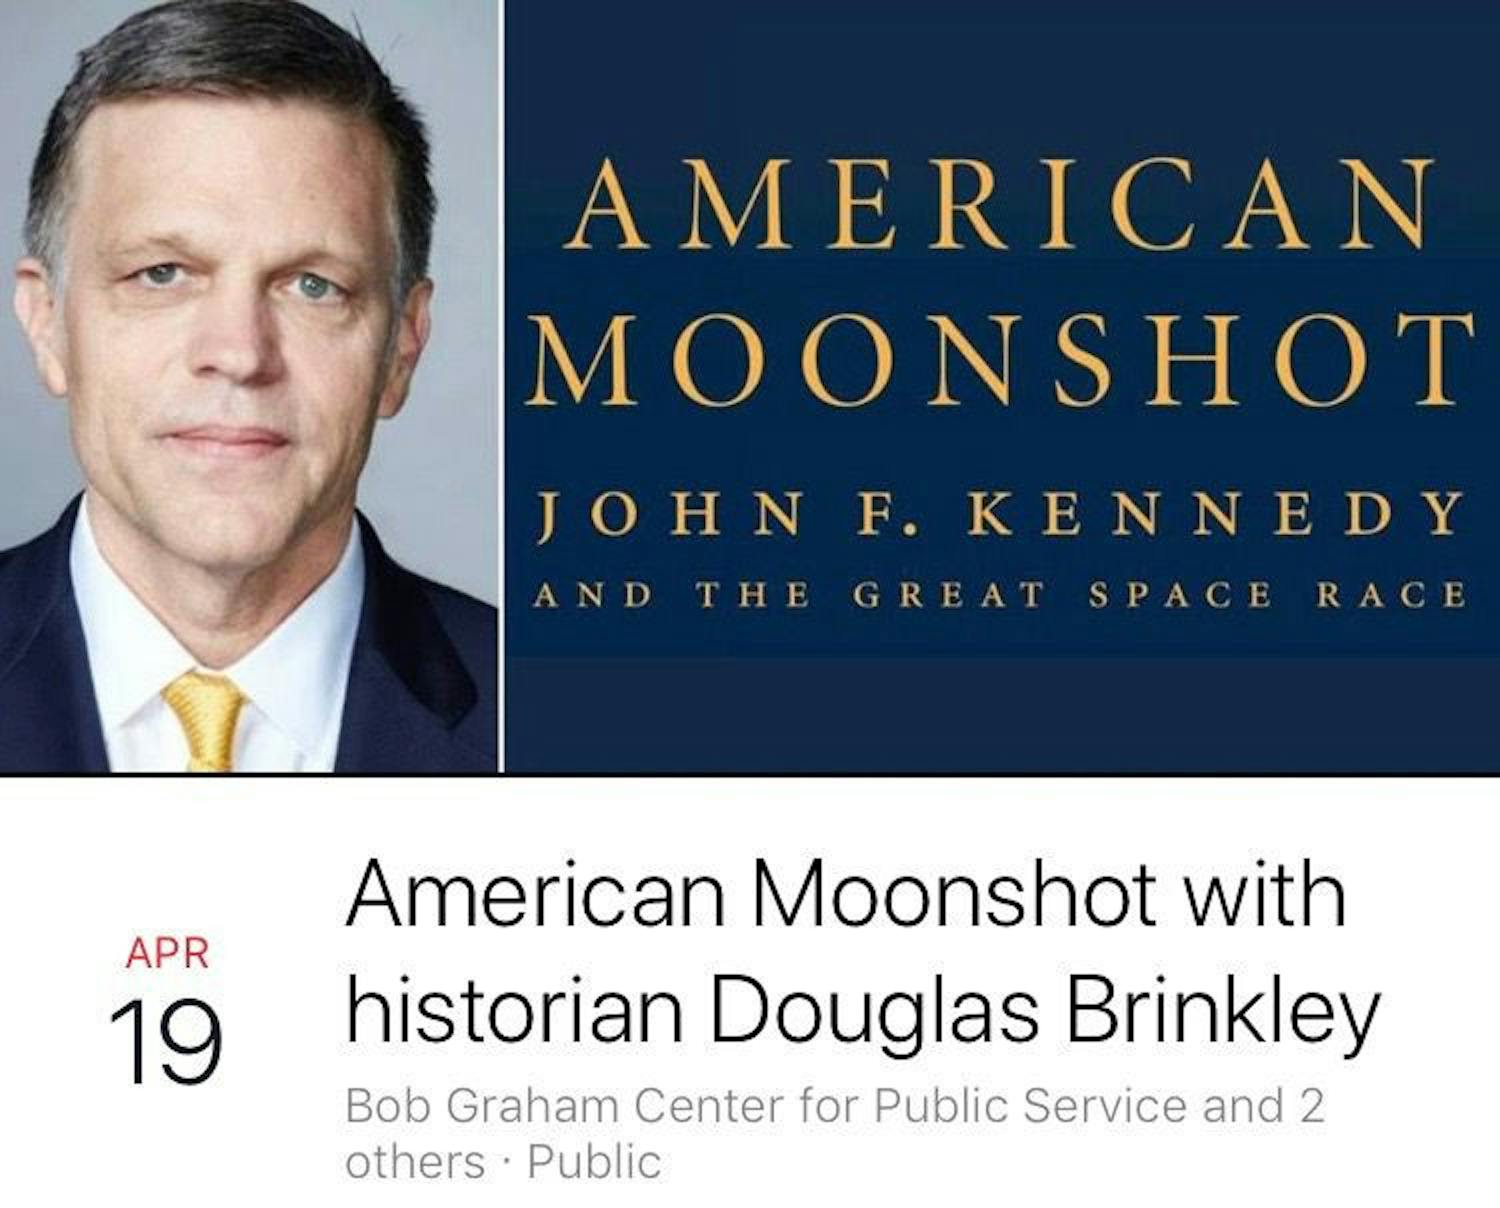 Historian and author Douglas Brinkley will speak at 6 p.m. on April 19 in the Buddy &amp; Anne MacKay Auditorium in Pugh Hall.